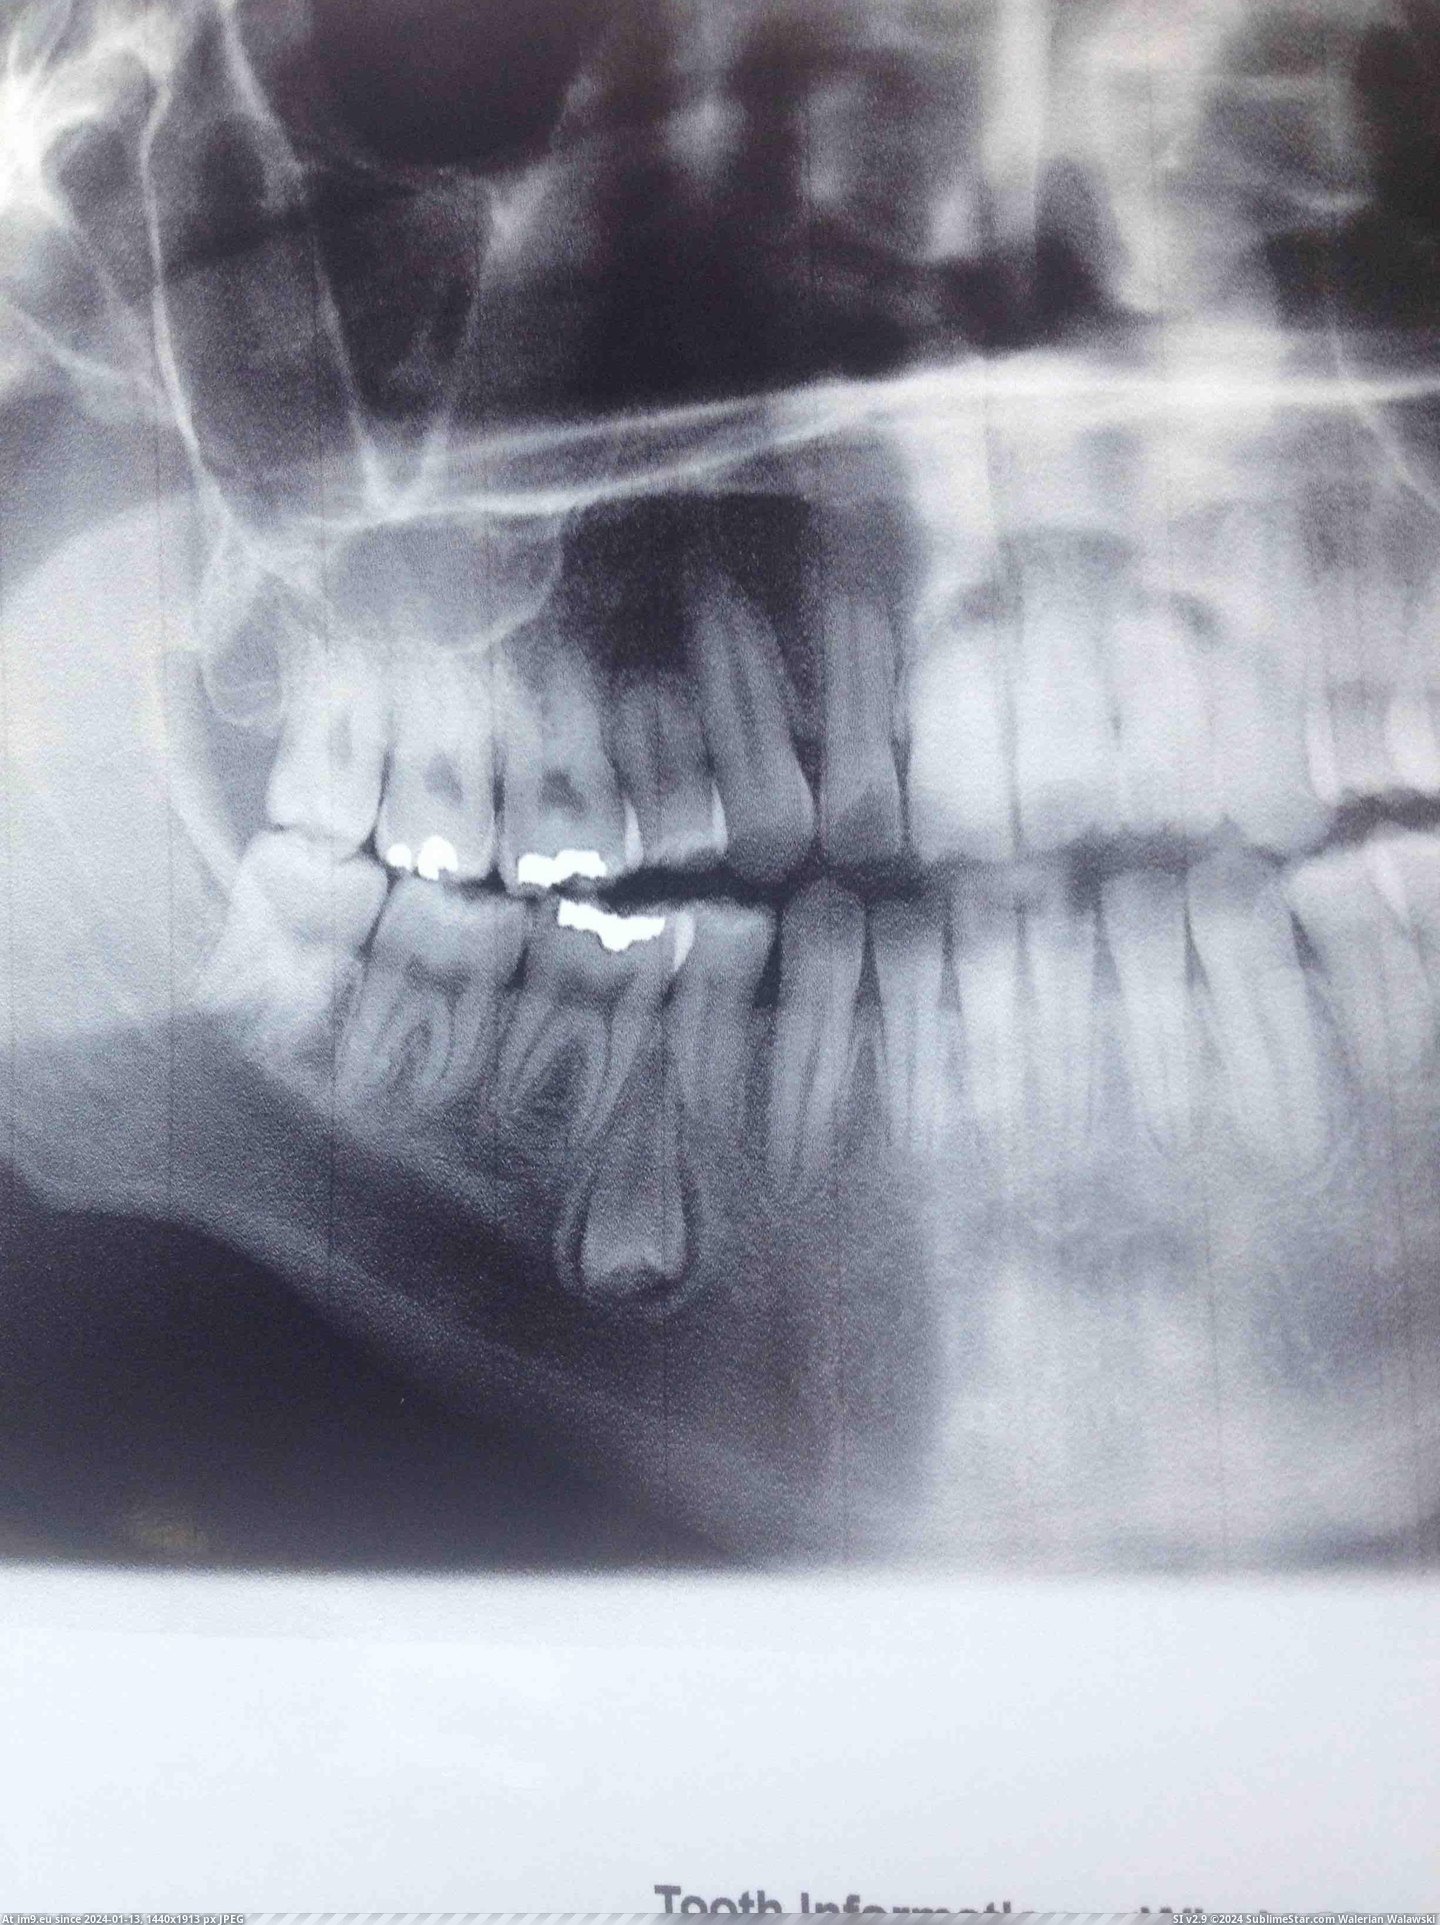 #Wtf #Growing #Tooth #Dentist #Gums #Upside #Discovered [Wtf] Went to the Dentist yesterday, they discovered a tooth growing upside down in my gums. Pic. (Image of album My r/WTF favs))